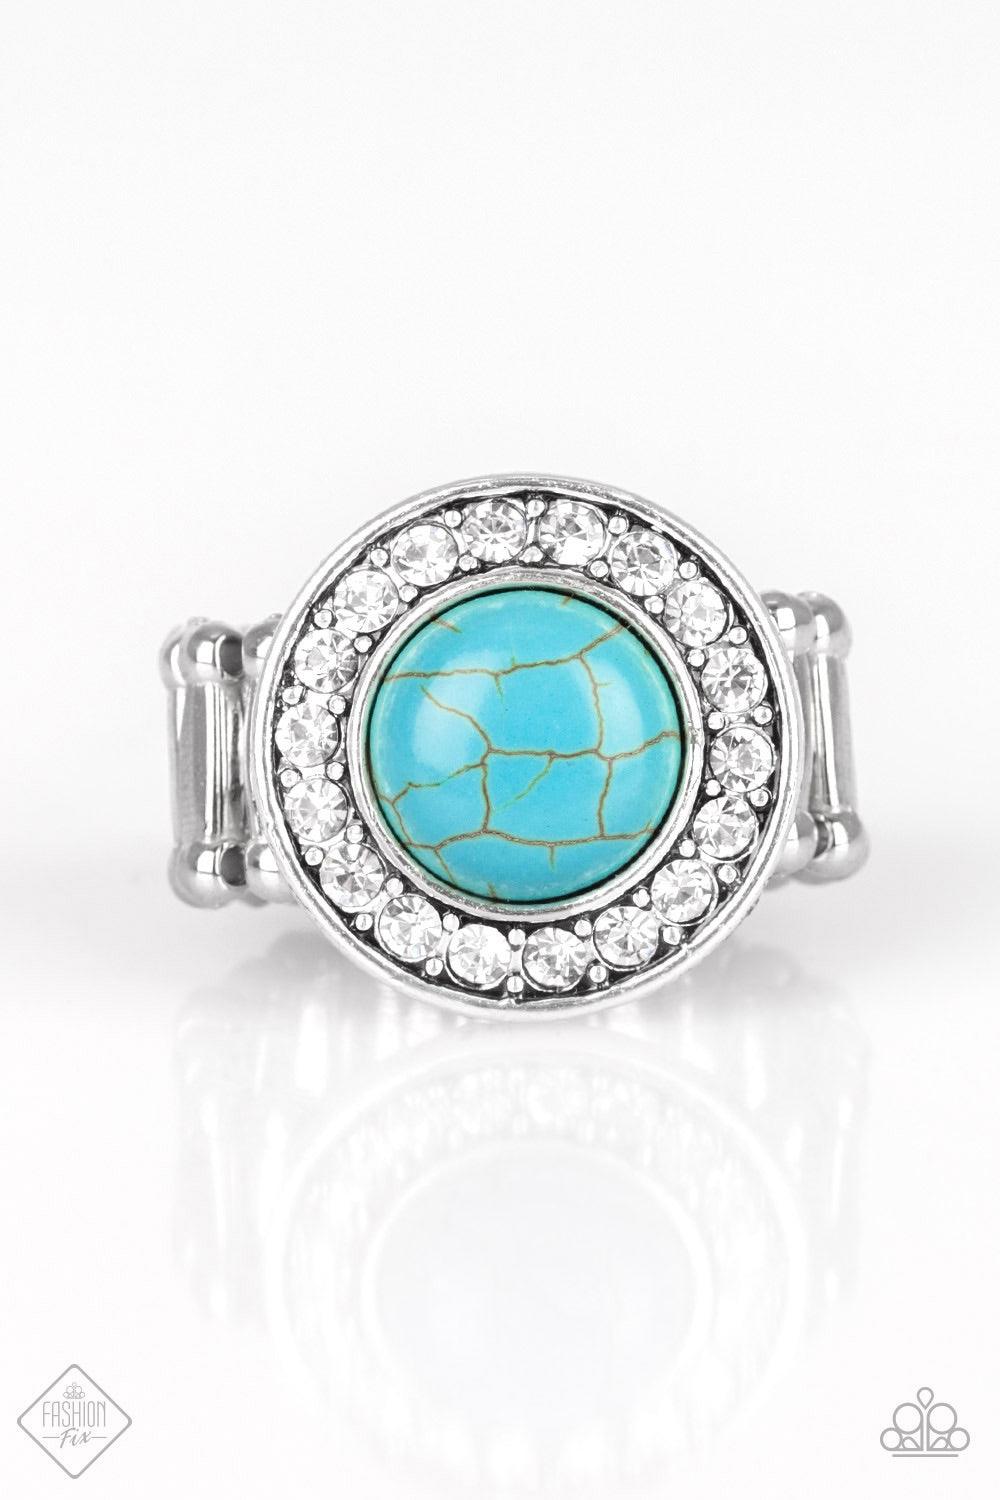 Paparazzi Accessories Rugged Radiance - Blue A refreshing turquoise stone is pressed into the center of a round silver frame radiating with glassy white rhinestones, creating an earthy, yet refined design. Features a stretchy band for a flexible fit. Jewe